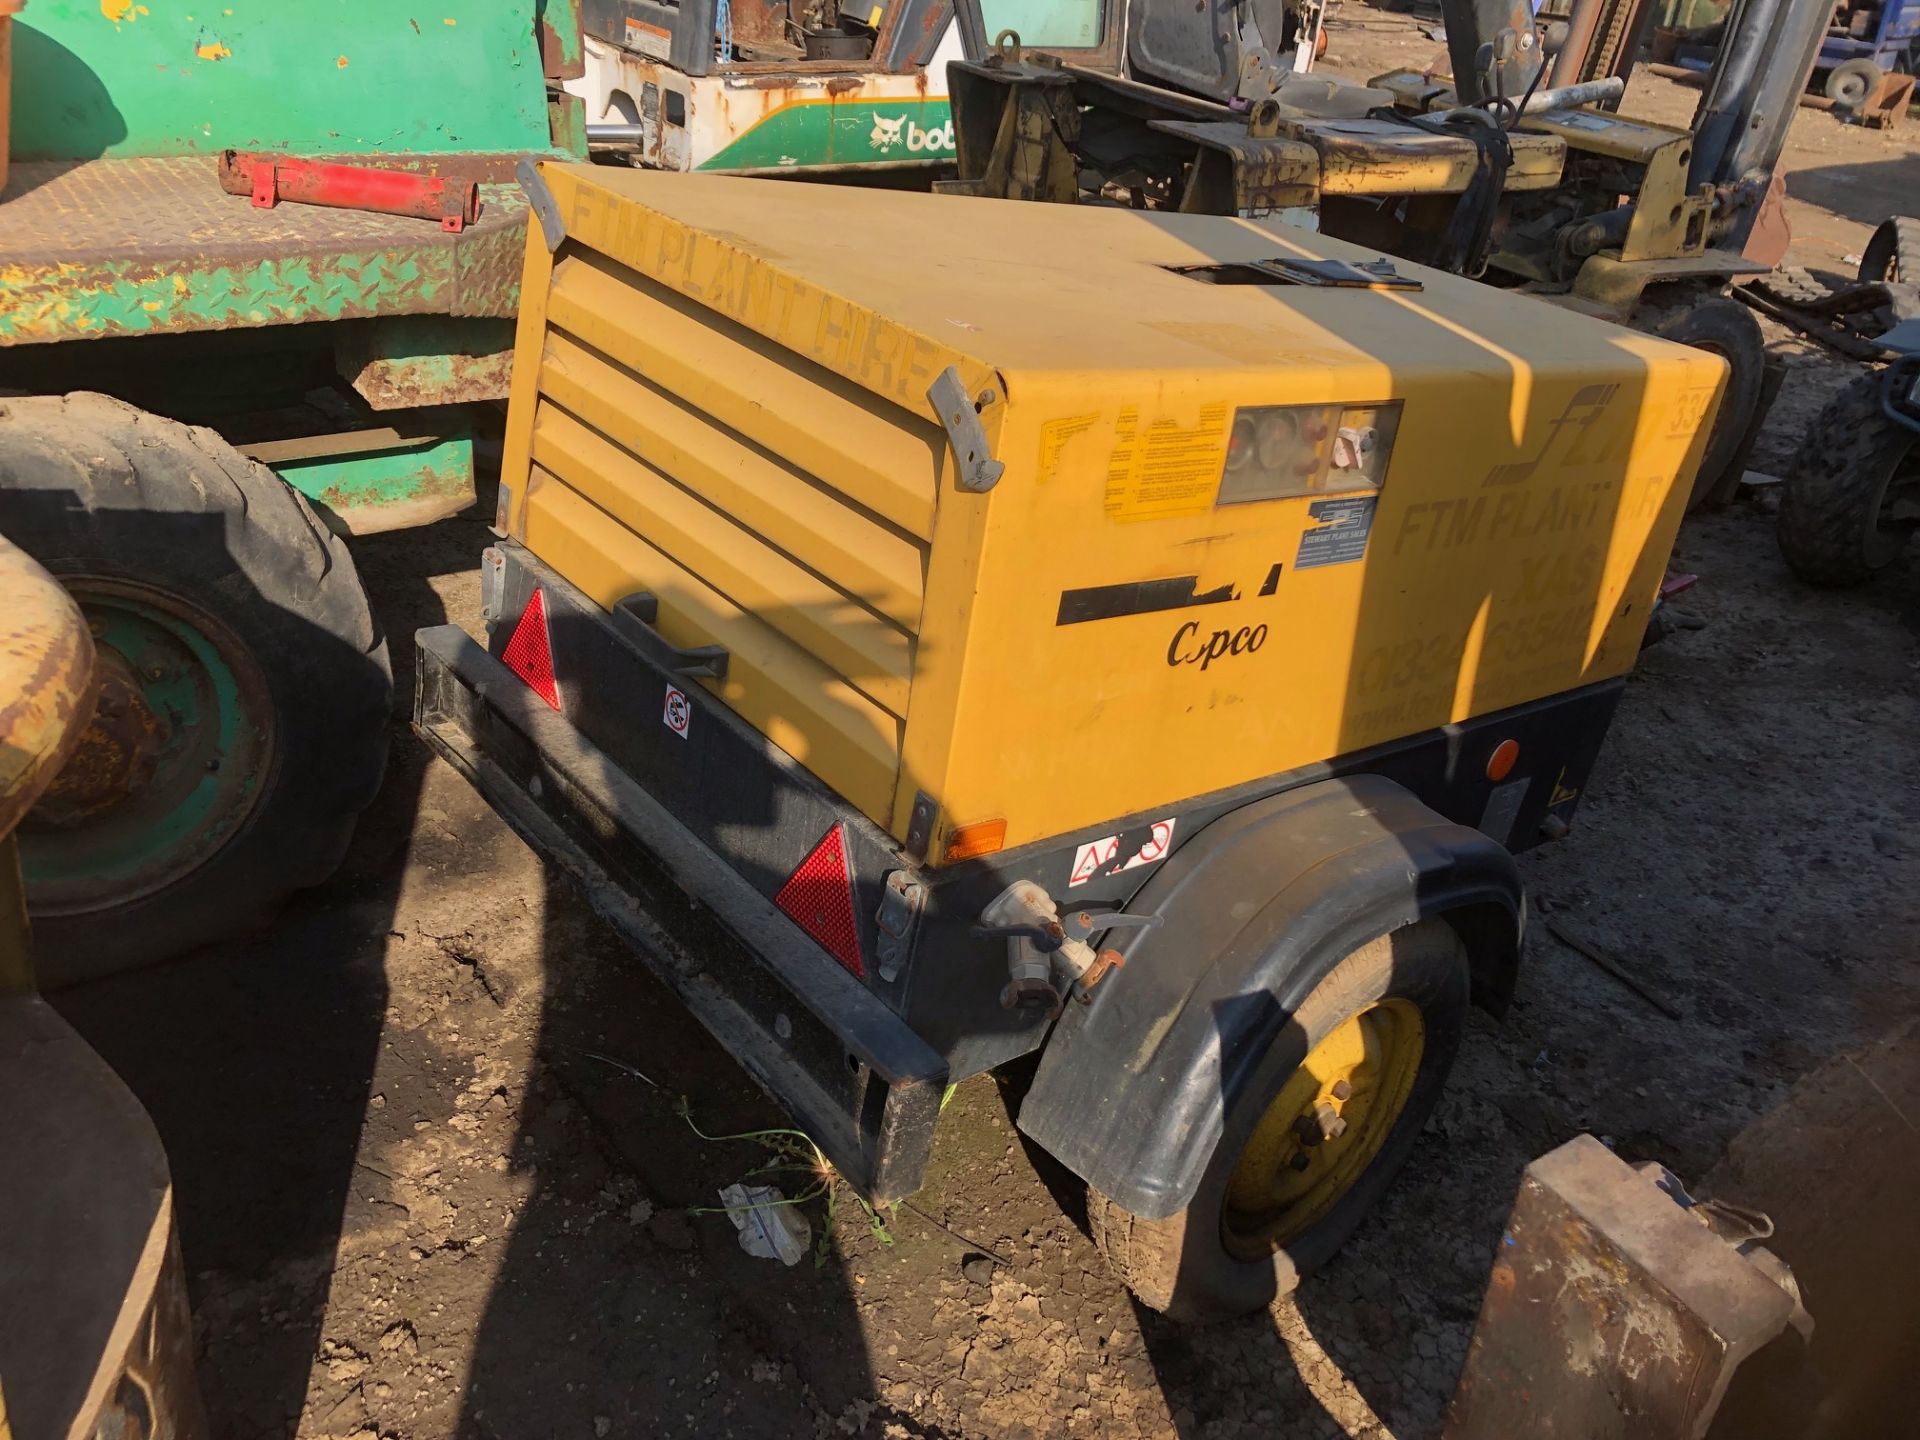 2005 ATLAS COPCO XAS36 COMPRESSOR, TOP MISSING OFF RECEIVER AS PICTURED, YANMAR ENGINE, 1400 HOURS - Image 2 of 8